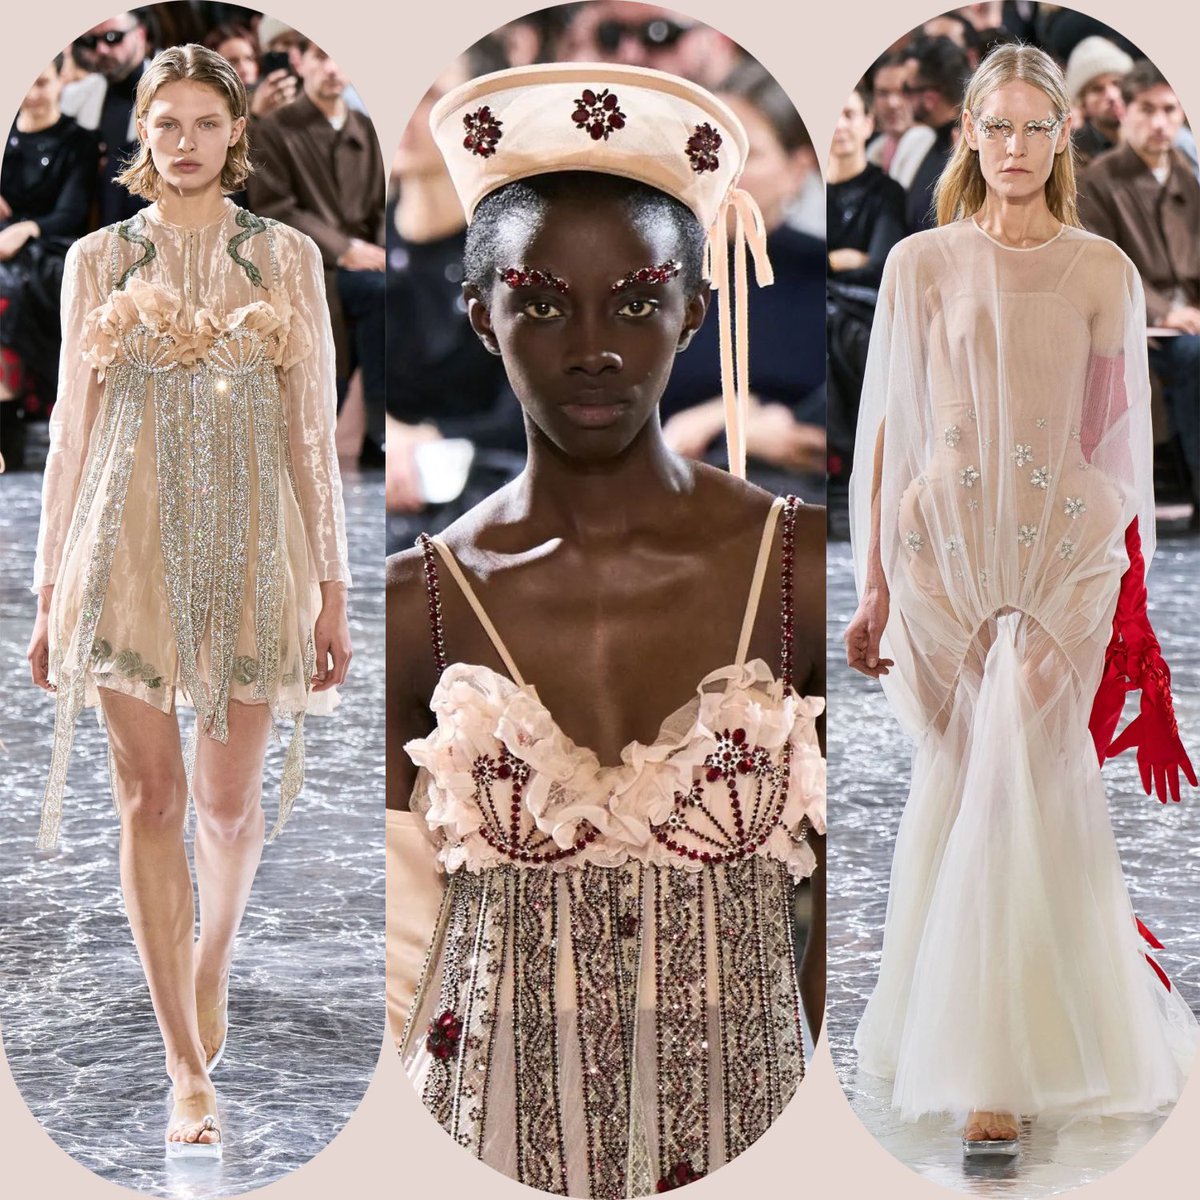 Jean Paul Gaultier Haute Couture Spring Summer 2024 – collection by Simone Rocha. 
Story by Eleonora de Gray, Editor-in-Chief of @runwaymagazine runwaymagazines.com/jean-paul-gaul…
 #JeanPaulGaultier #JPGFashion #JPGHauteCouture #SimoneRocha #Runway  #PFW  #EleonoradeGray #RunwayMagazine